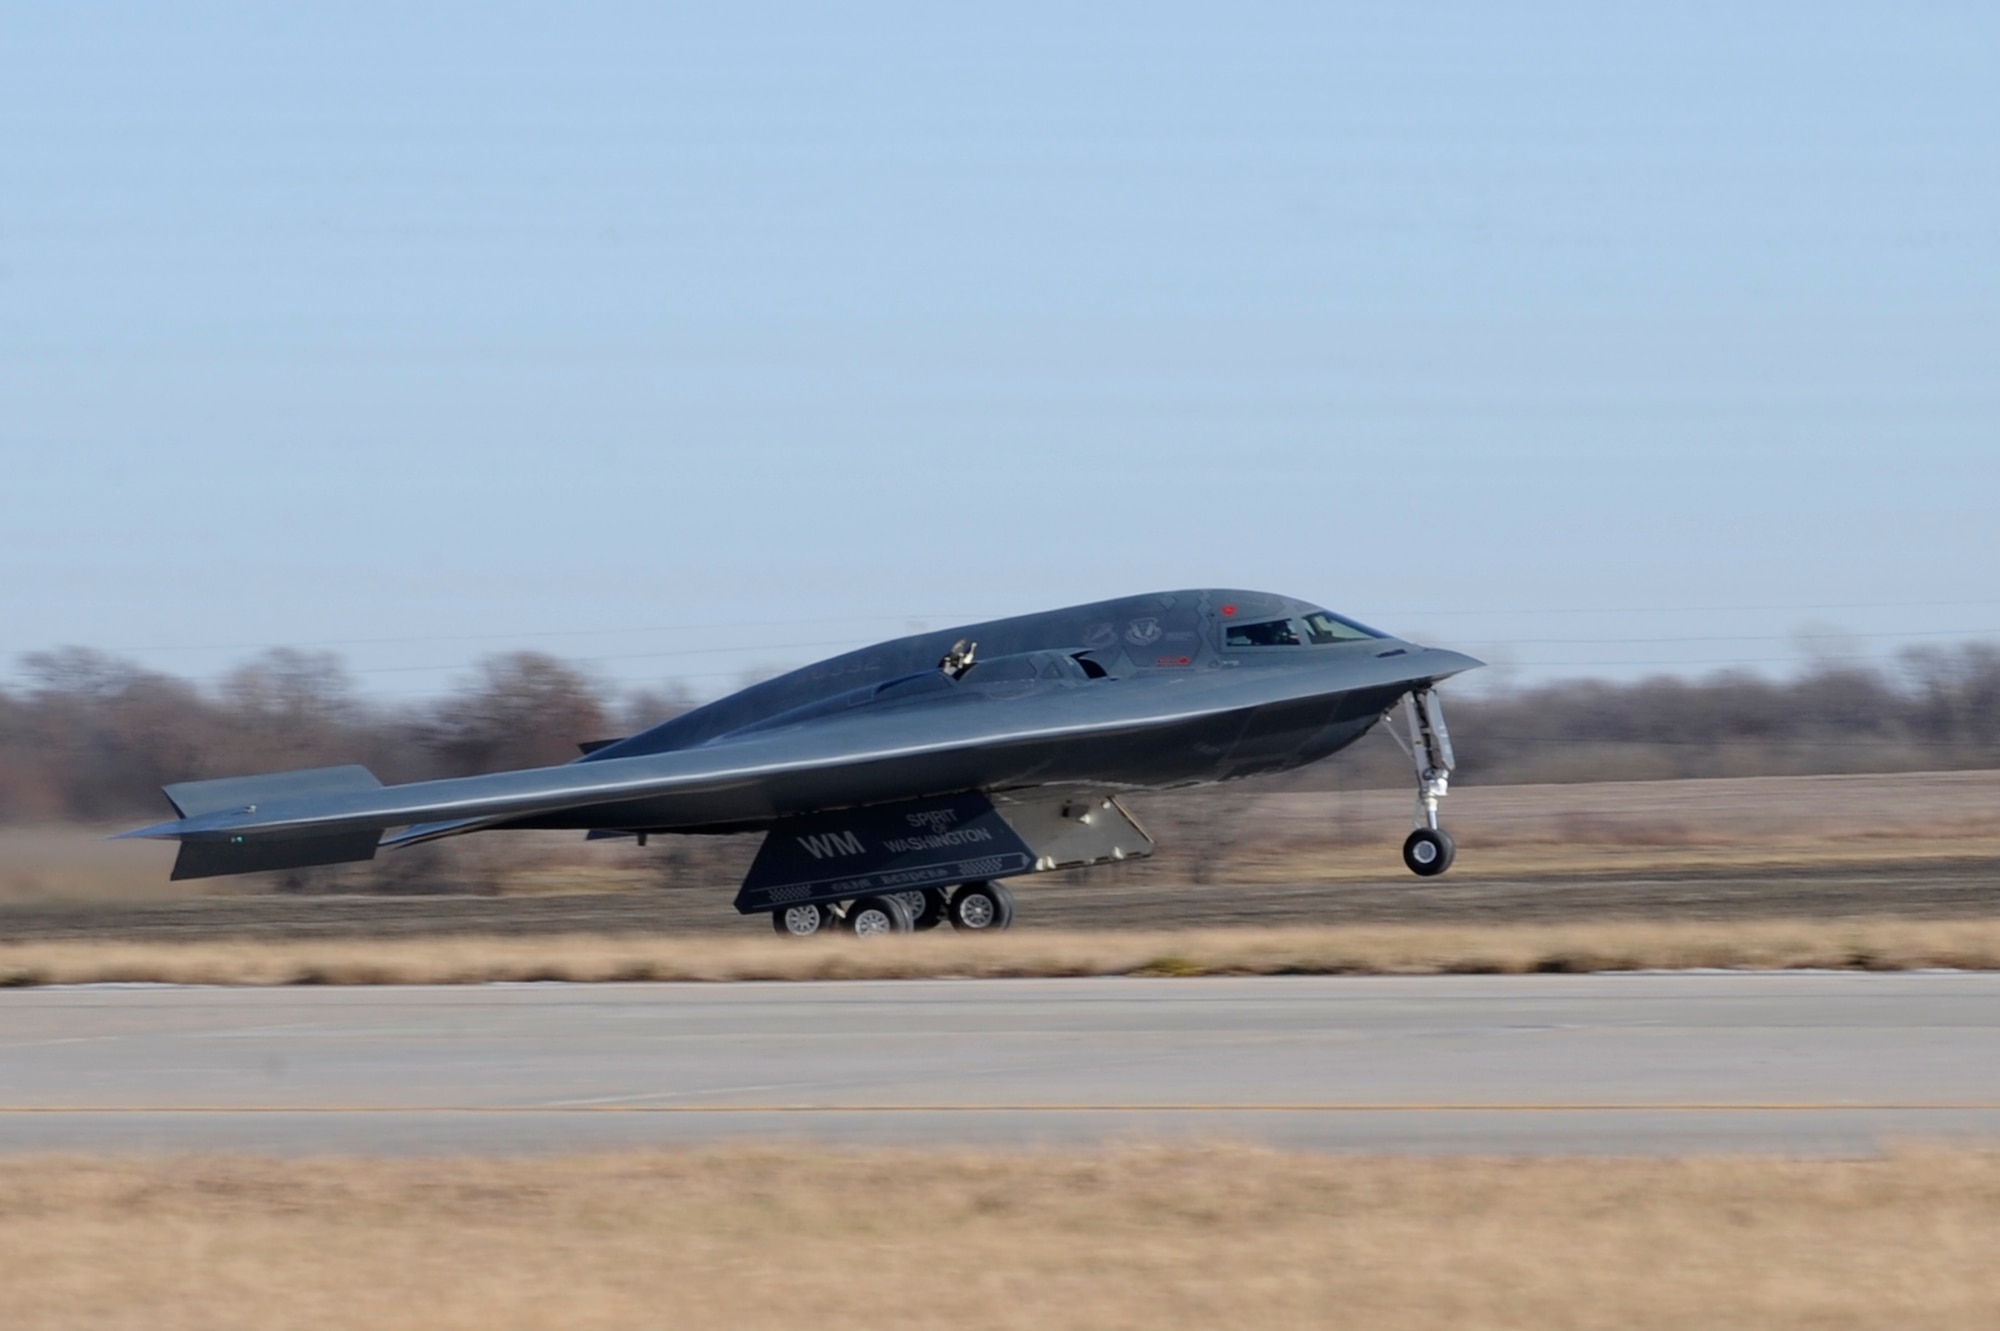 The “Spirit of Washington” lands at Whiteman Air Force Base, Mo., Dec. 16, 2013. The B-2 Spirit participated in its first training mission here after an engine fire in 2010 badly damaged the aircraft. The “Spirit of Washington” was preparing to fly a mission at Anderson Air Force Base, Guam, when one of its four engines caught fire. After nearly four years, the aircraft was restored to full mission-ready status.  (U.S. Air Force photo by Staff Sgt. Alexandra M. Boutte/Released)